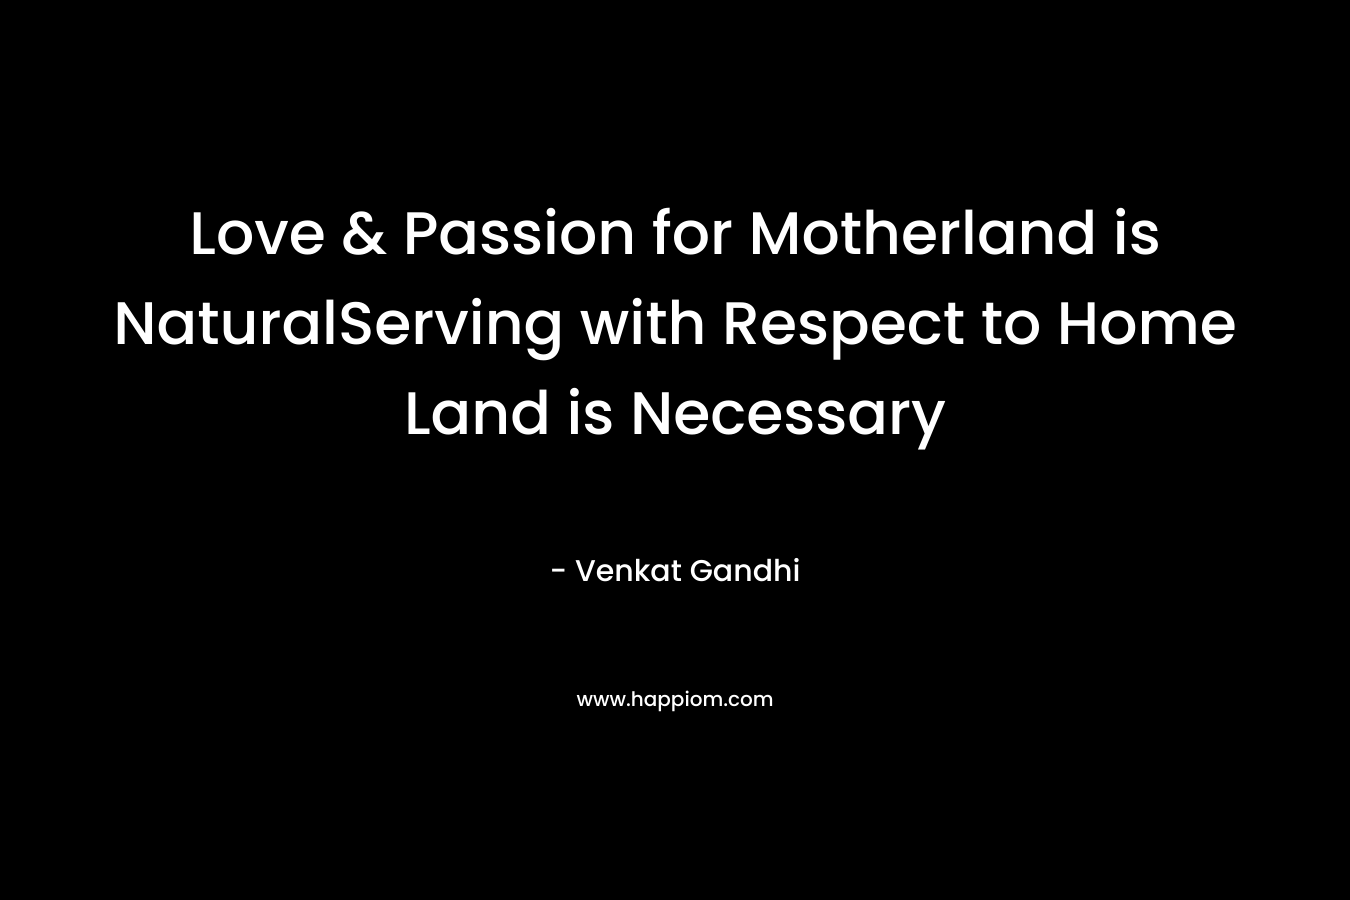 Love & Passion for Motherland is NaturalServing with Respect to Home Land is Necessary